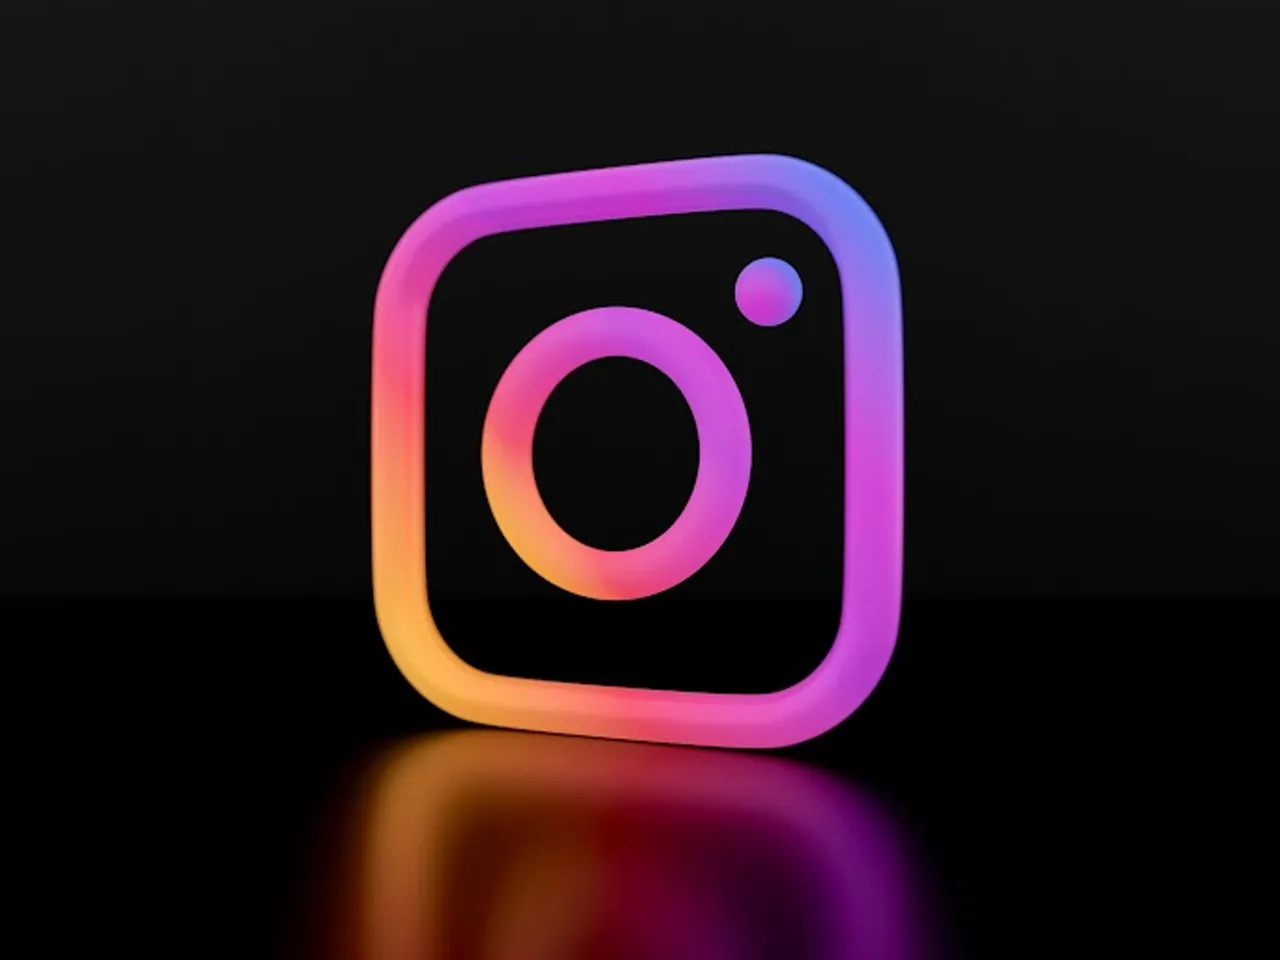 Instagram now allows users to download public Reels